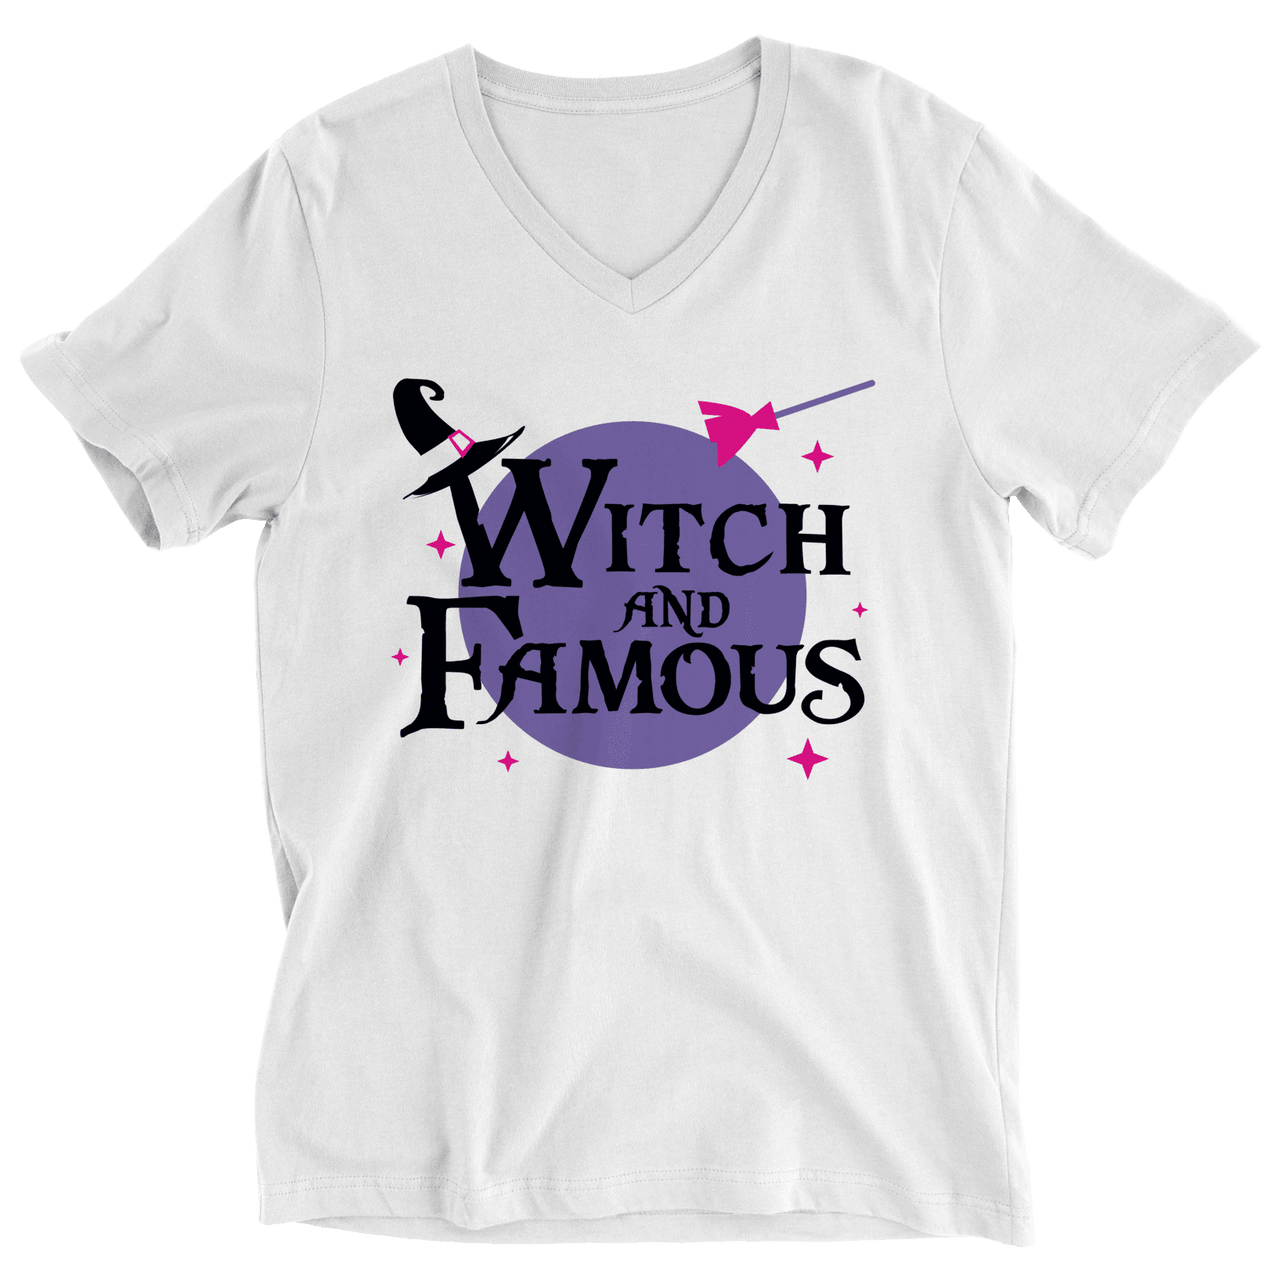 Witch and Famous White Halloween T-Shirt